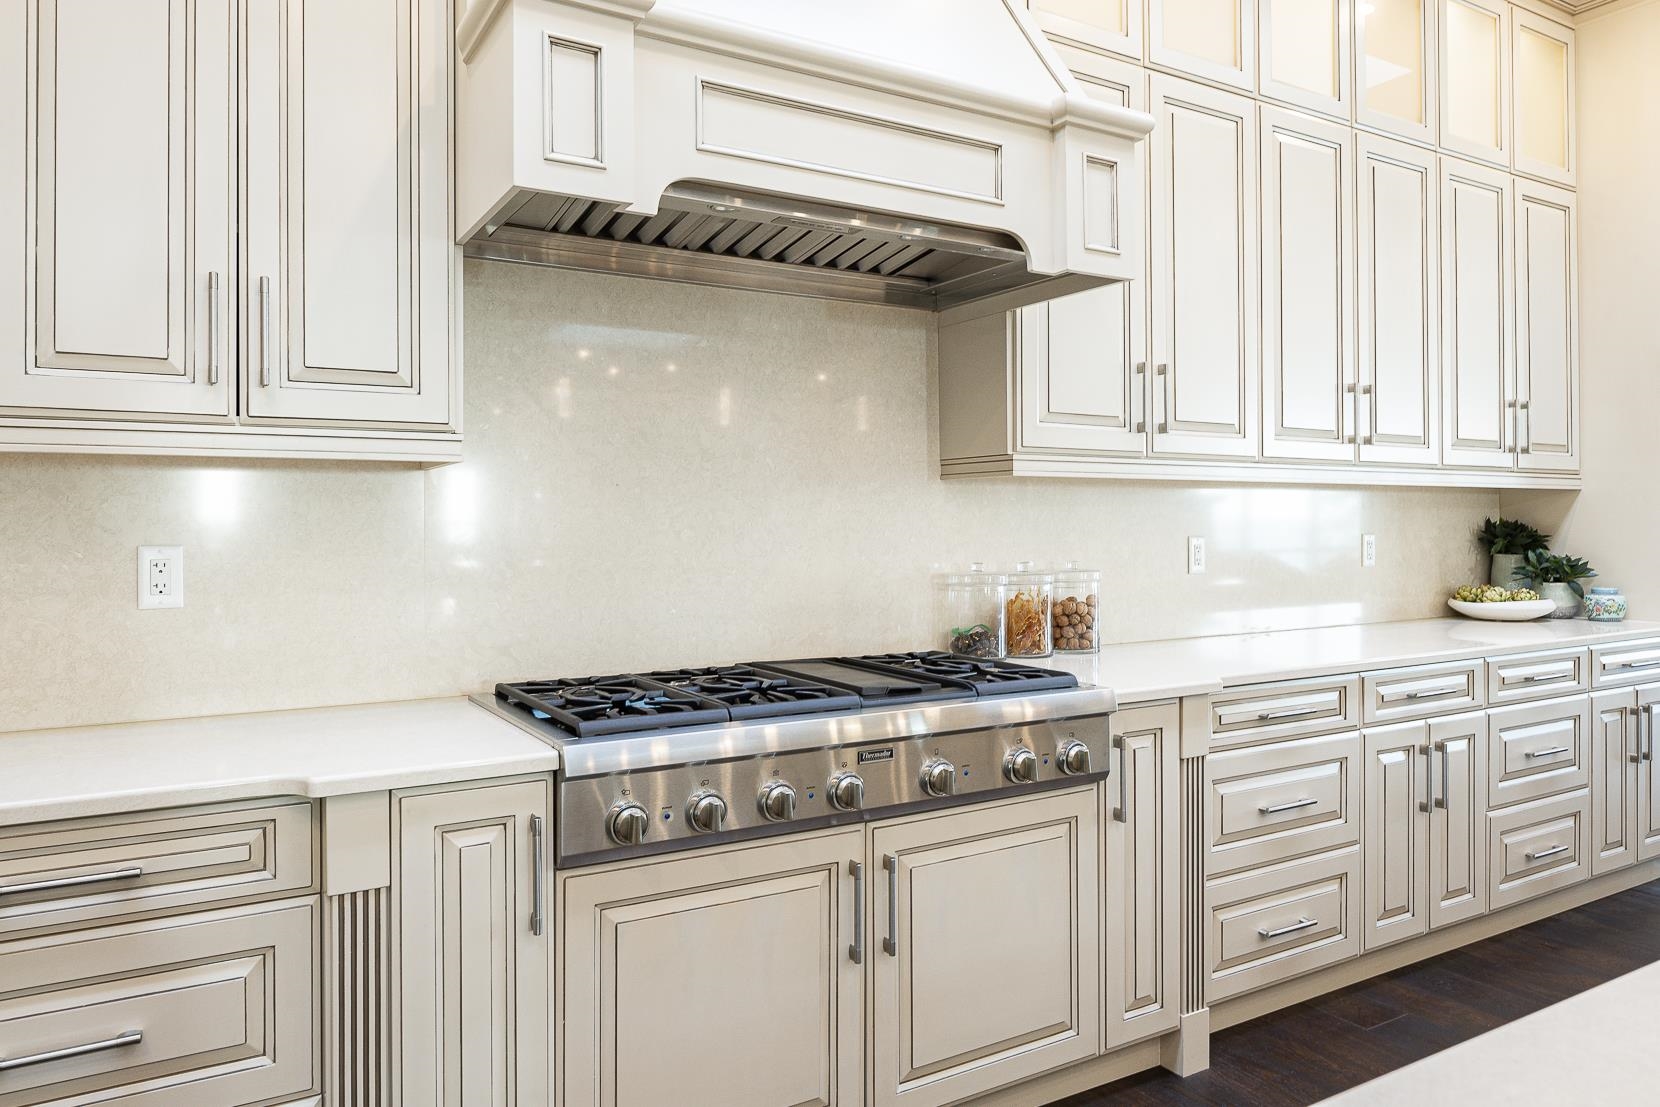 Timeless cabinetry adds elegance and sophistication to the next level